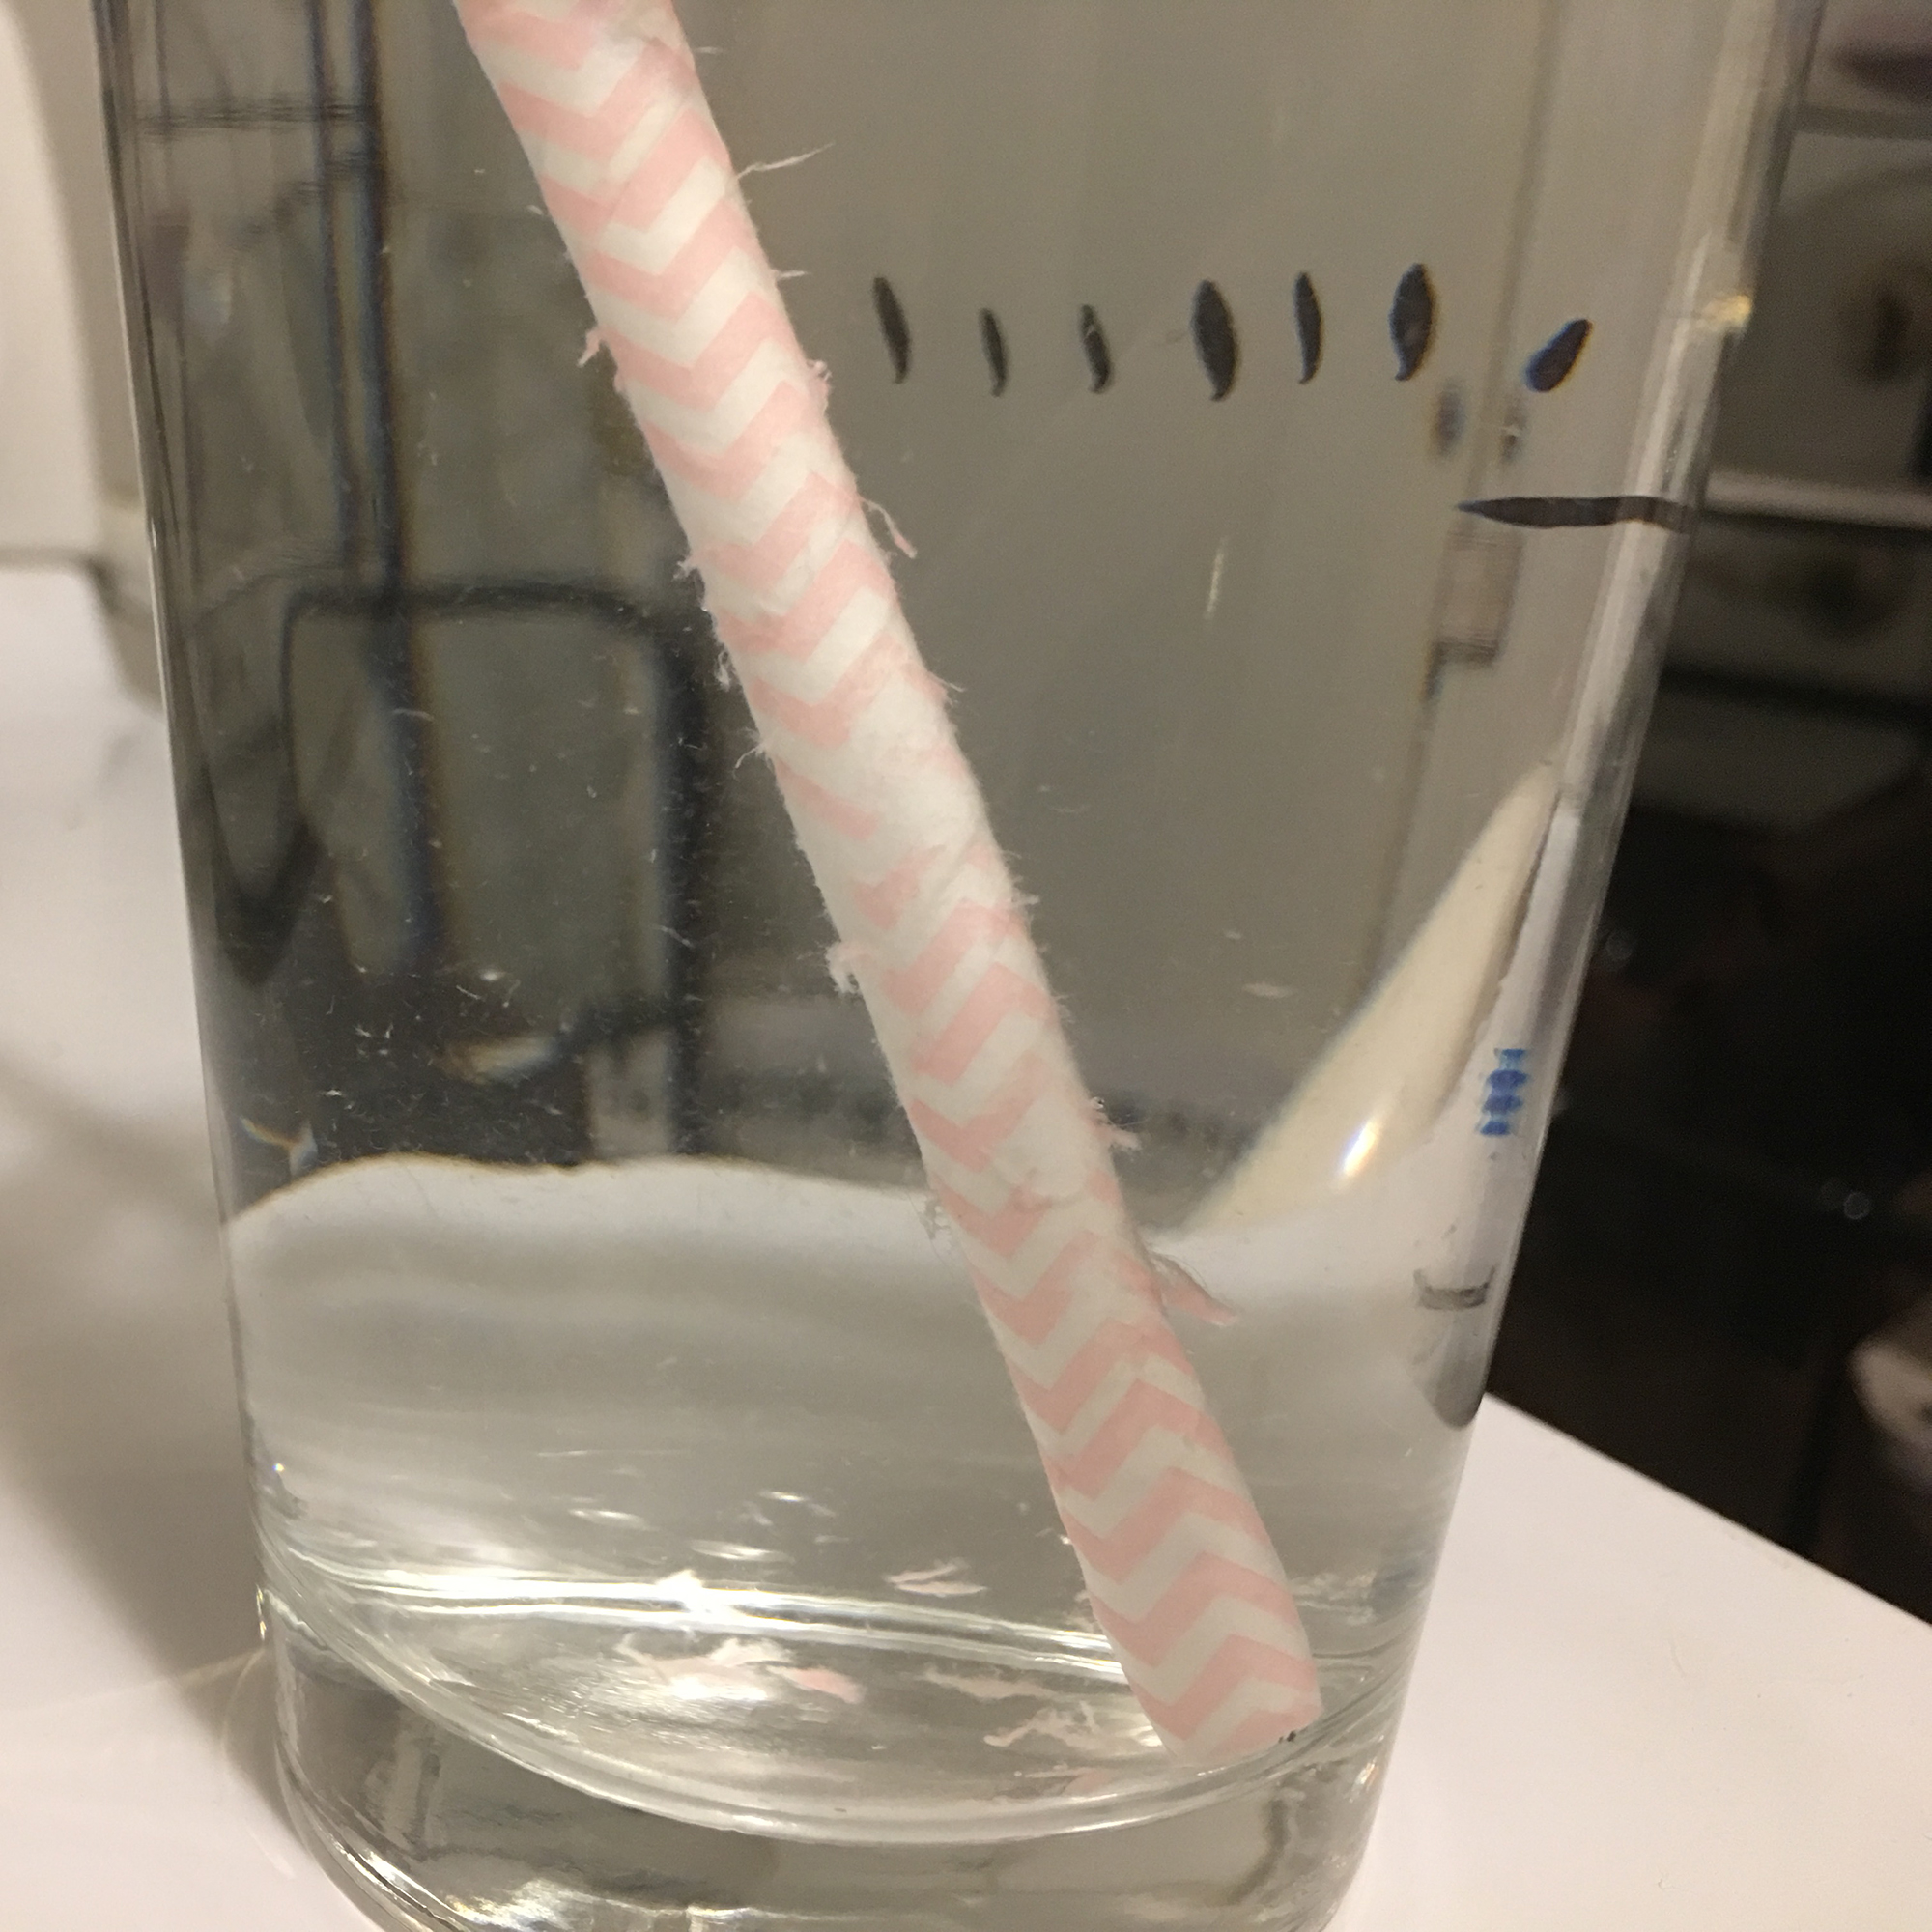 Paper straw dissolving in a glass of water.